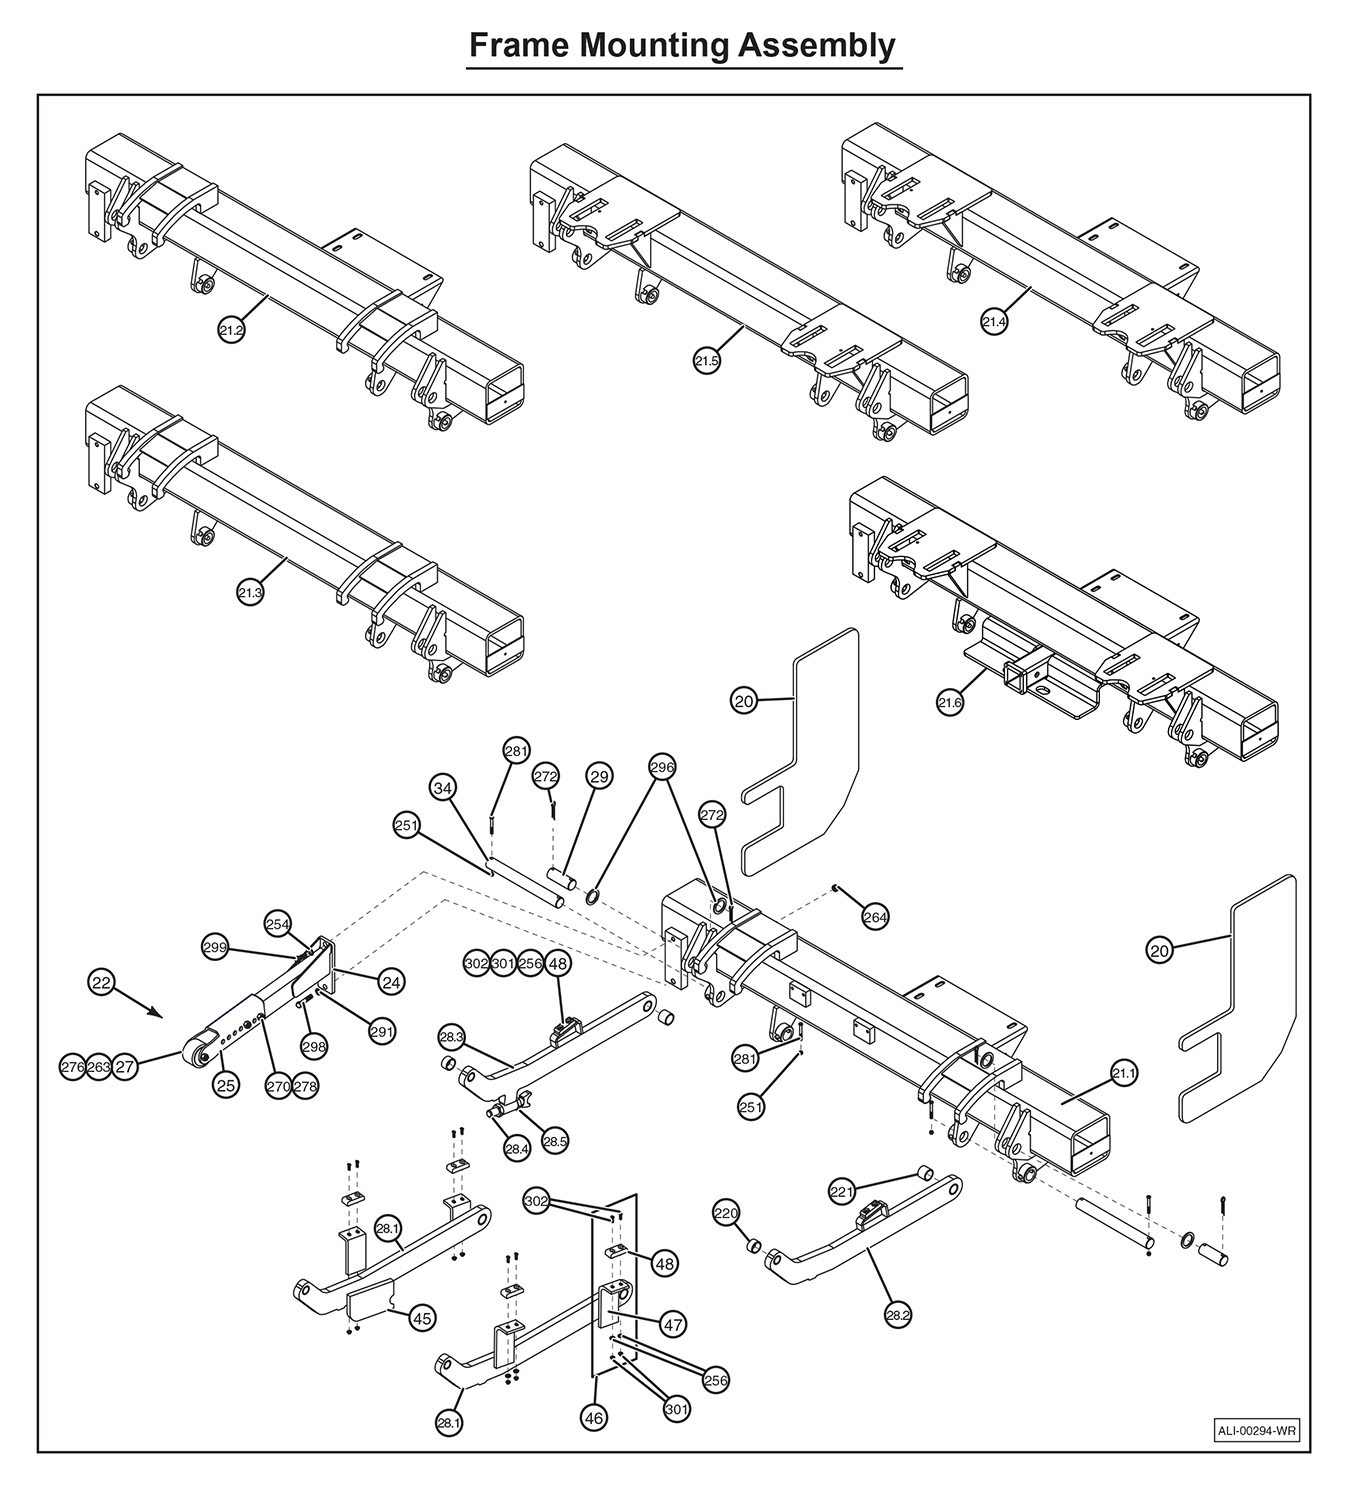 Anthony MTU-GLR-WR Frame Mounting Assembly Diagram